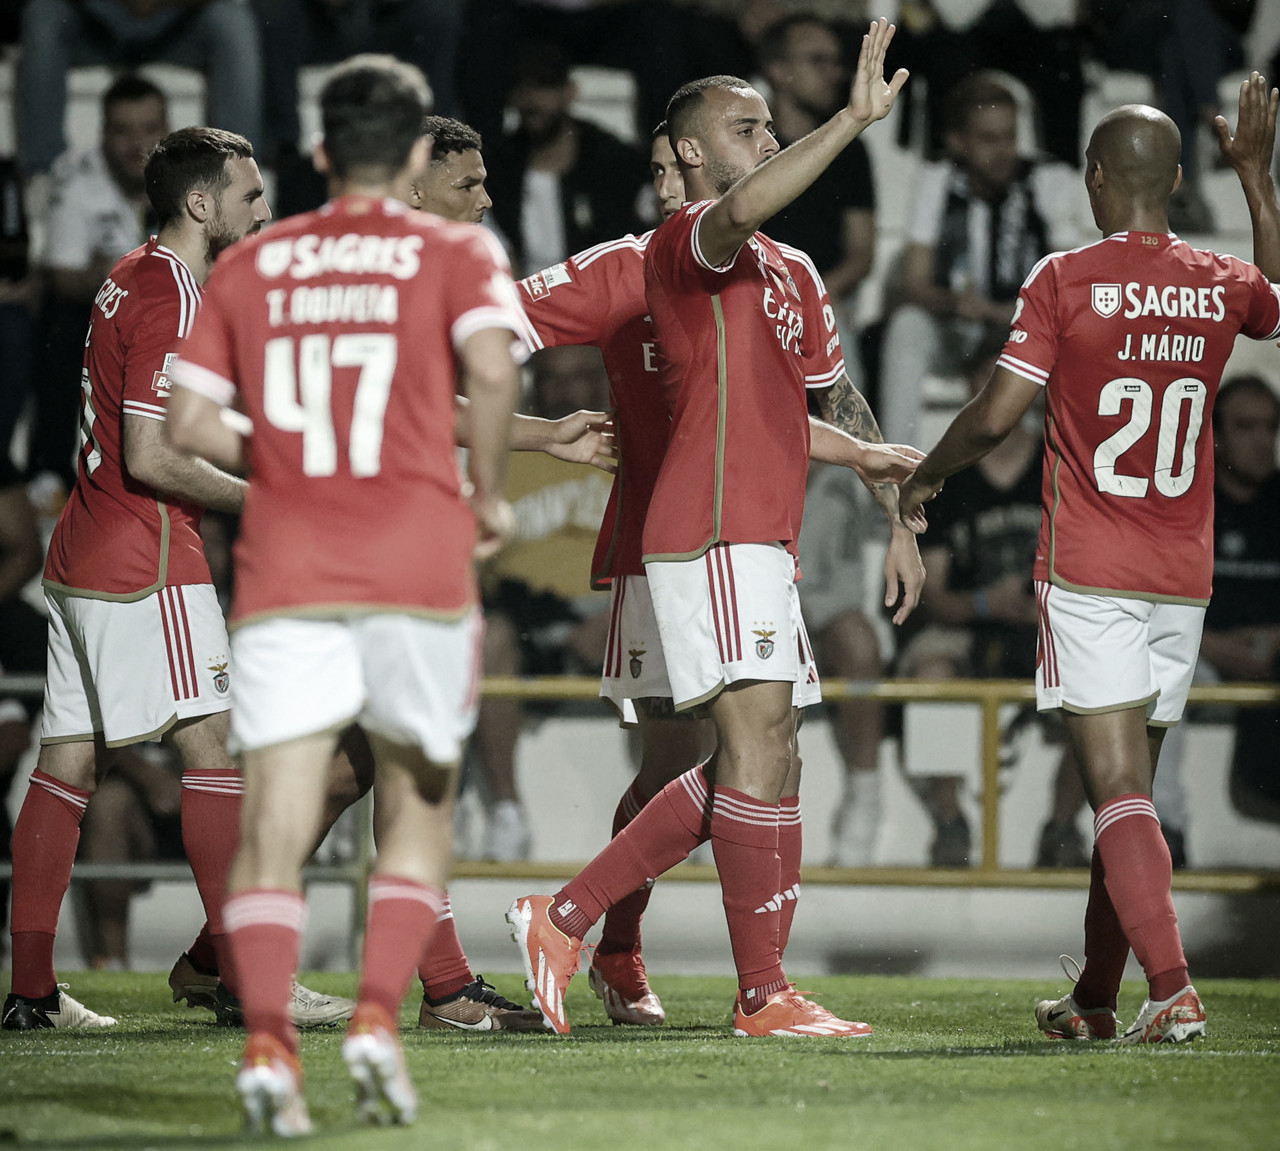 Goals and Highlights: Benfica vs Braga in Portugal League